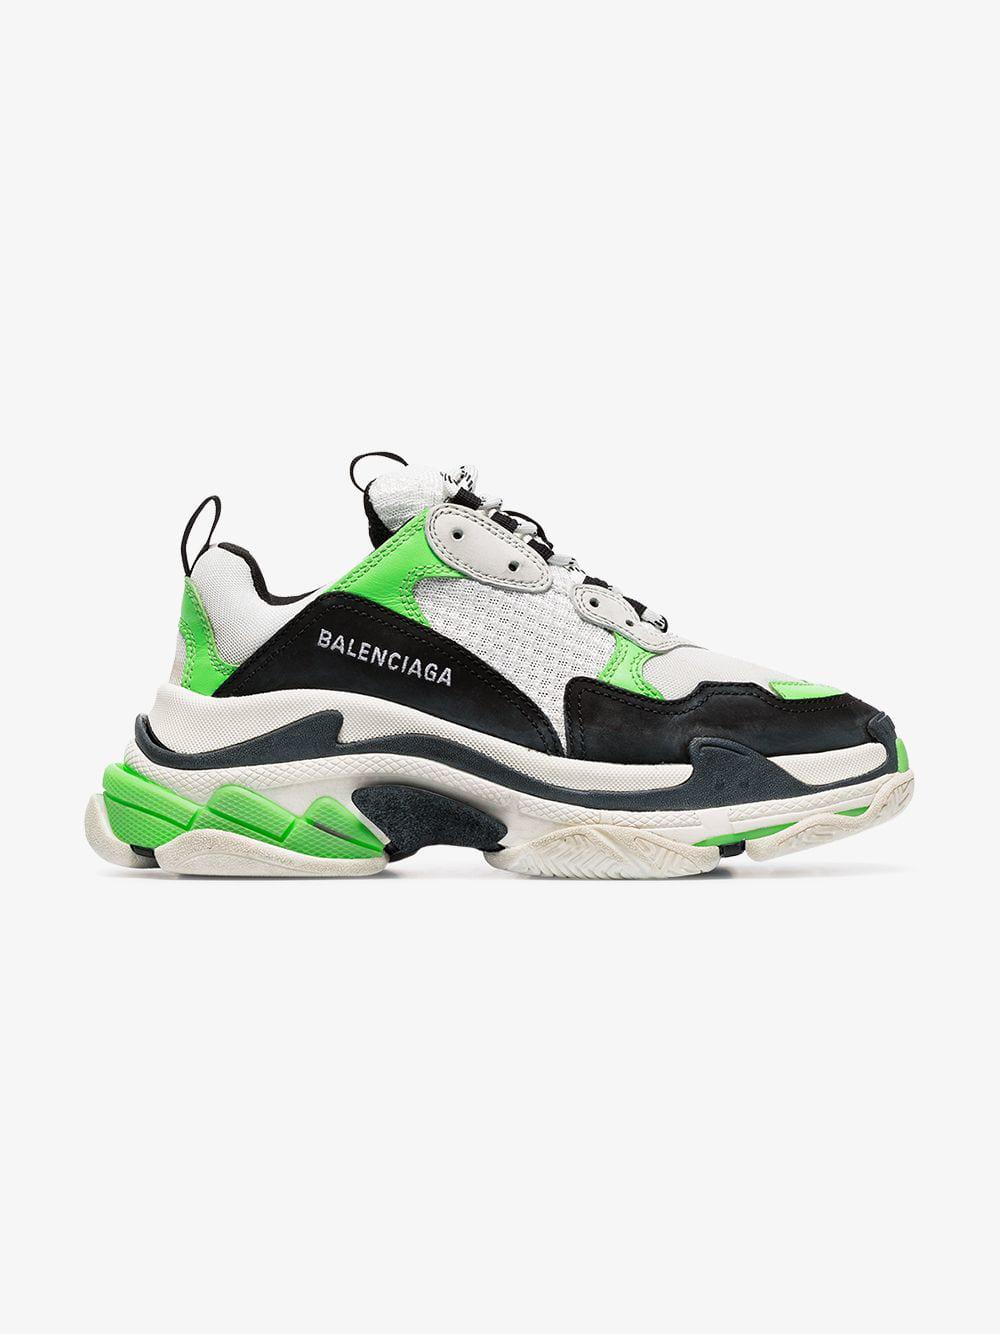 Balenciaga Neon Green And Black Triple S Sneakers in White | Lyst